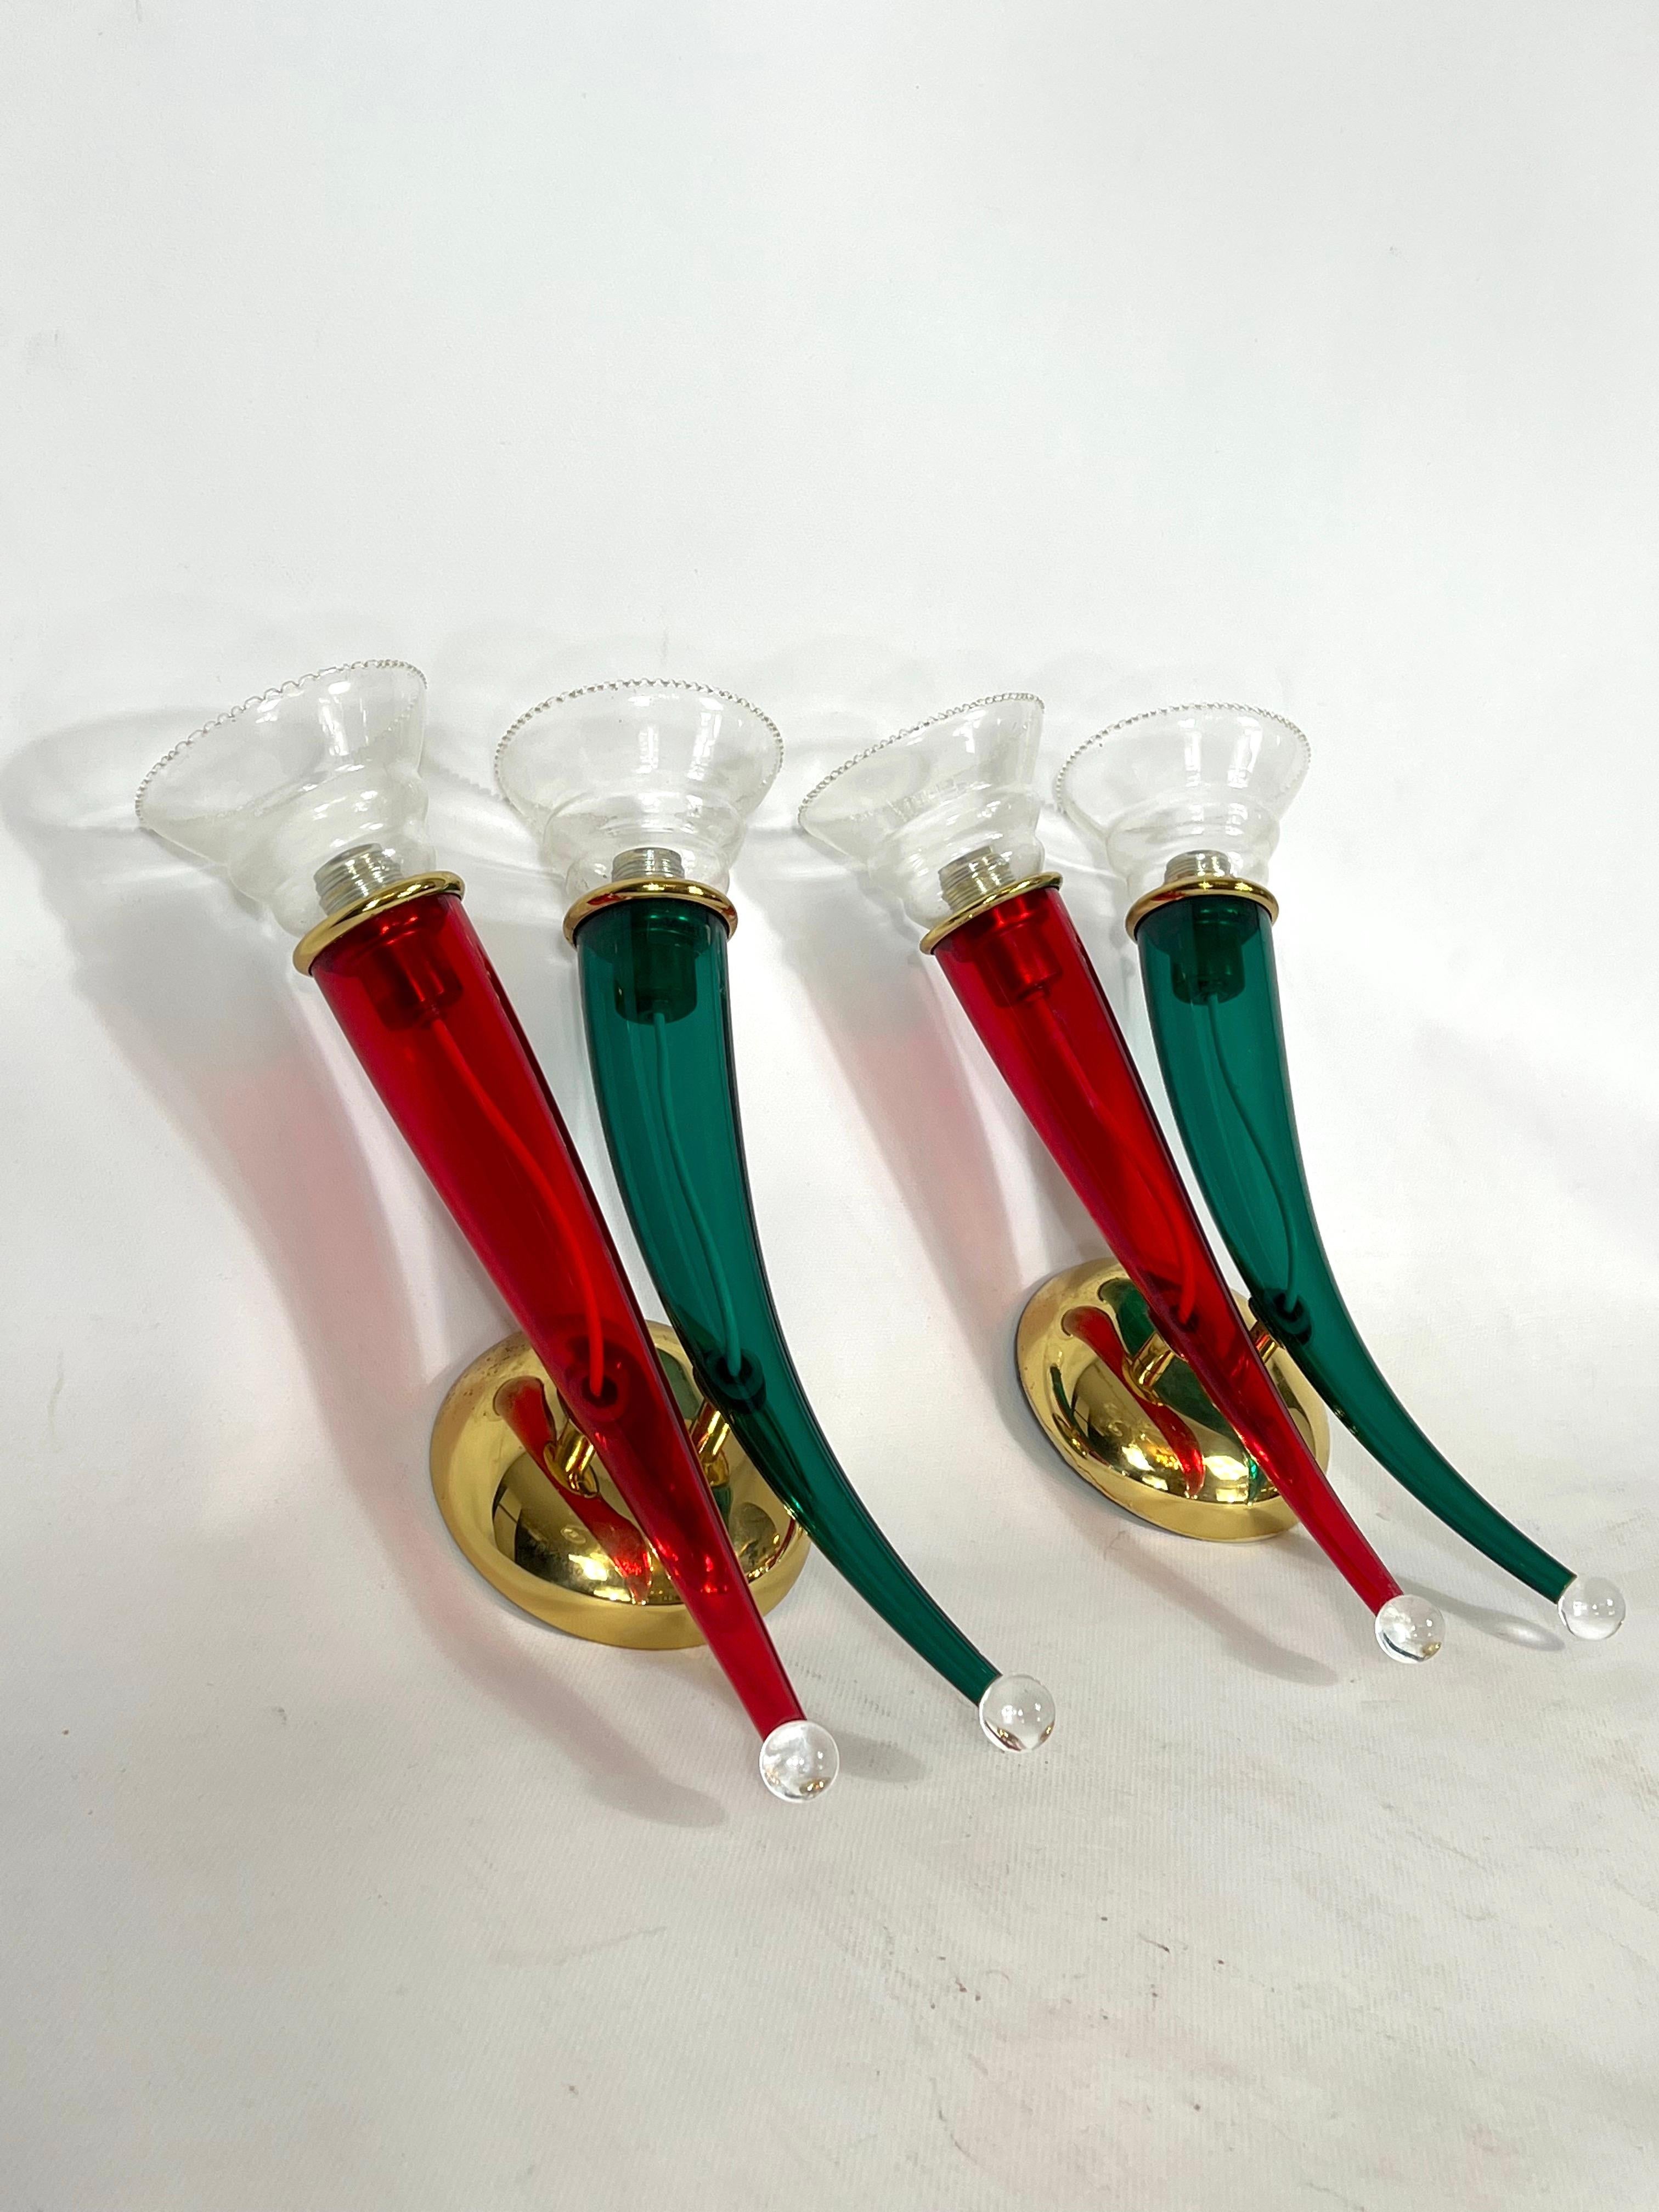 Italian Vintage Pair of Murano Glass Sconces Signed by VeArt, Italy, 1970s For Sale